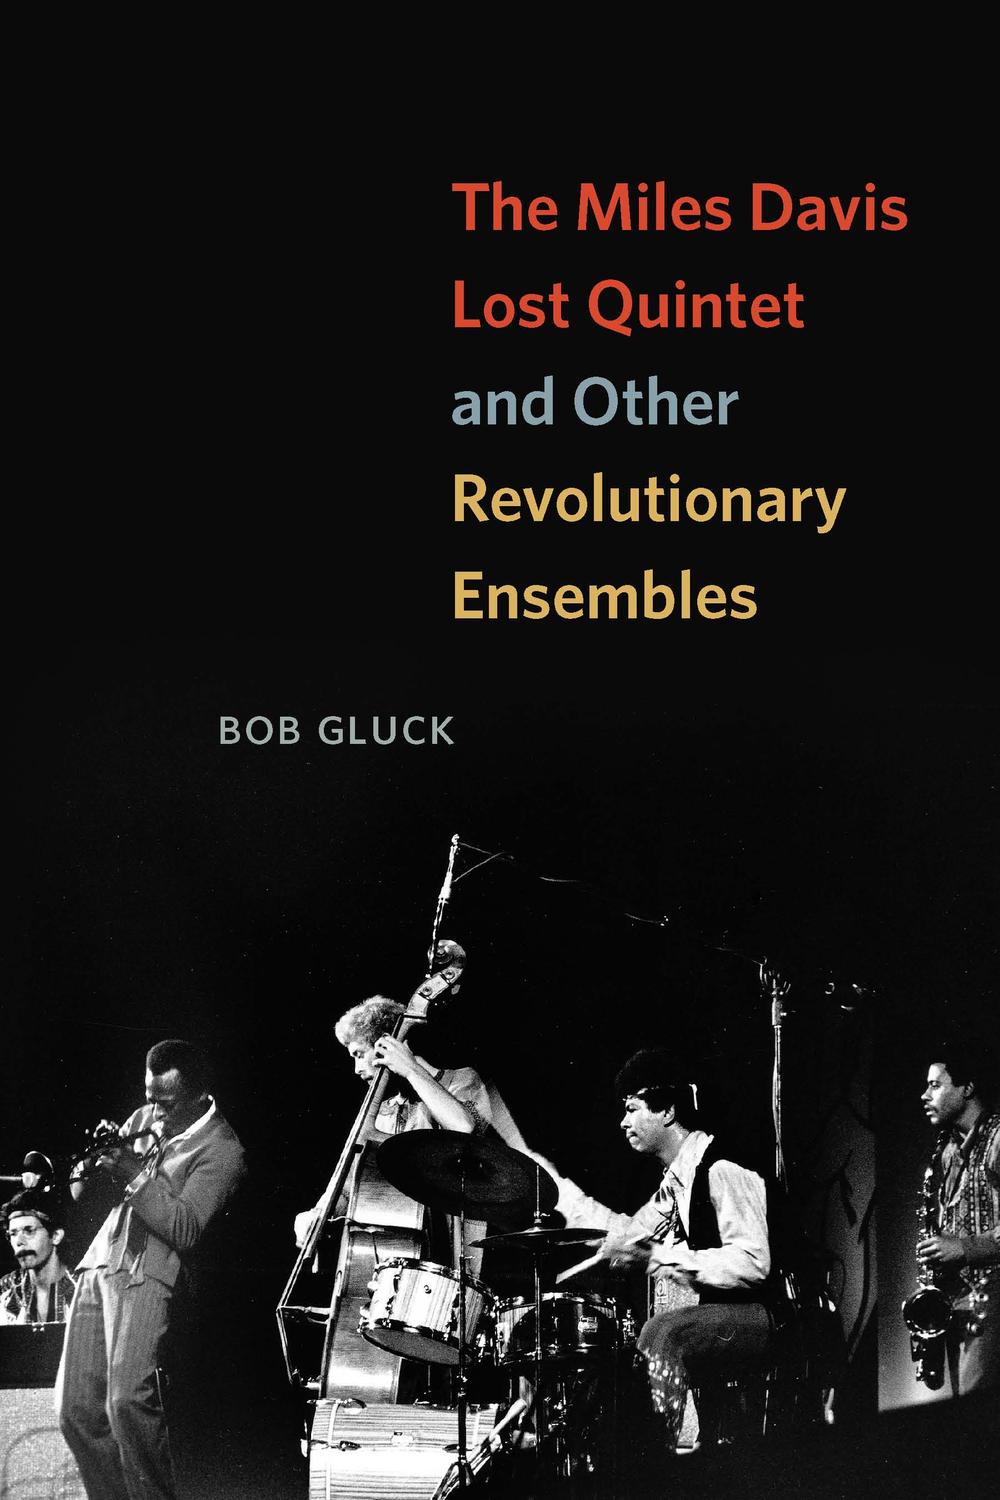 The Miles Davis Lost Quintet and Other Revolutionary Ensembles - Bob Gluck